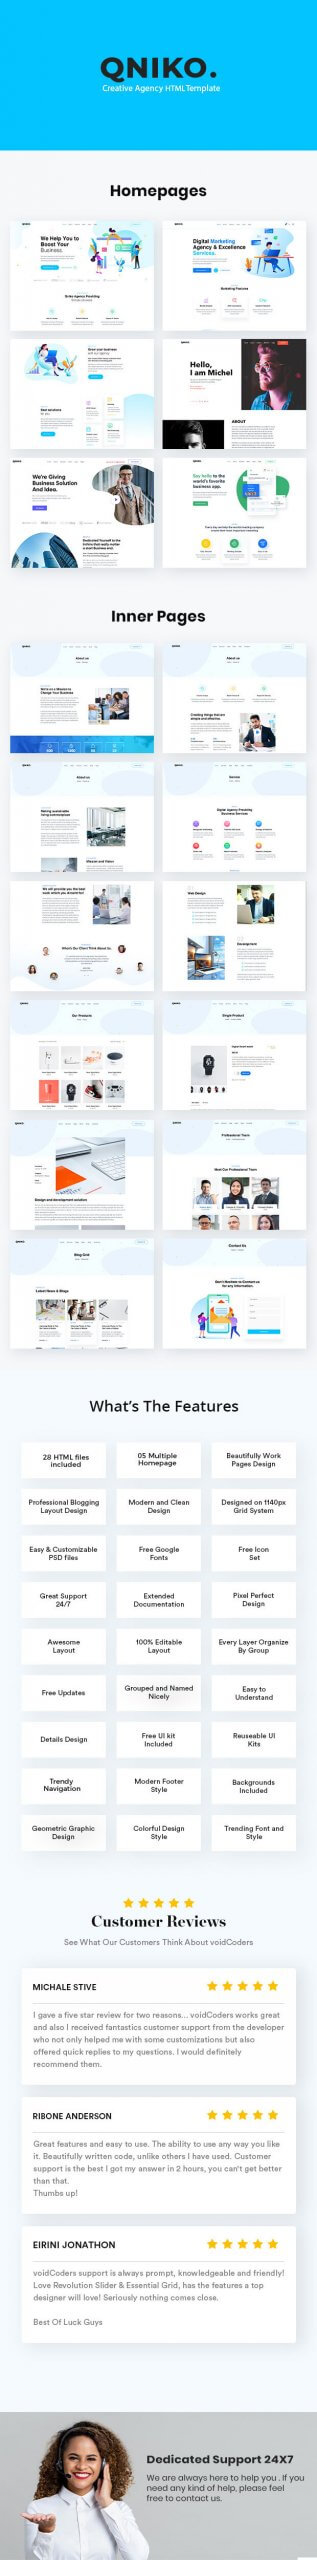 Qniko - Startup Agency HTML5 Template With RTL Support - 1